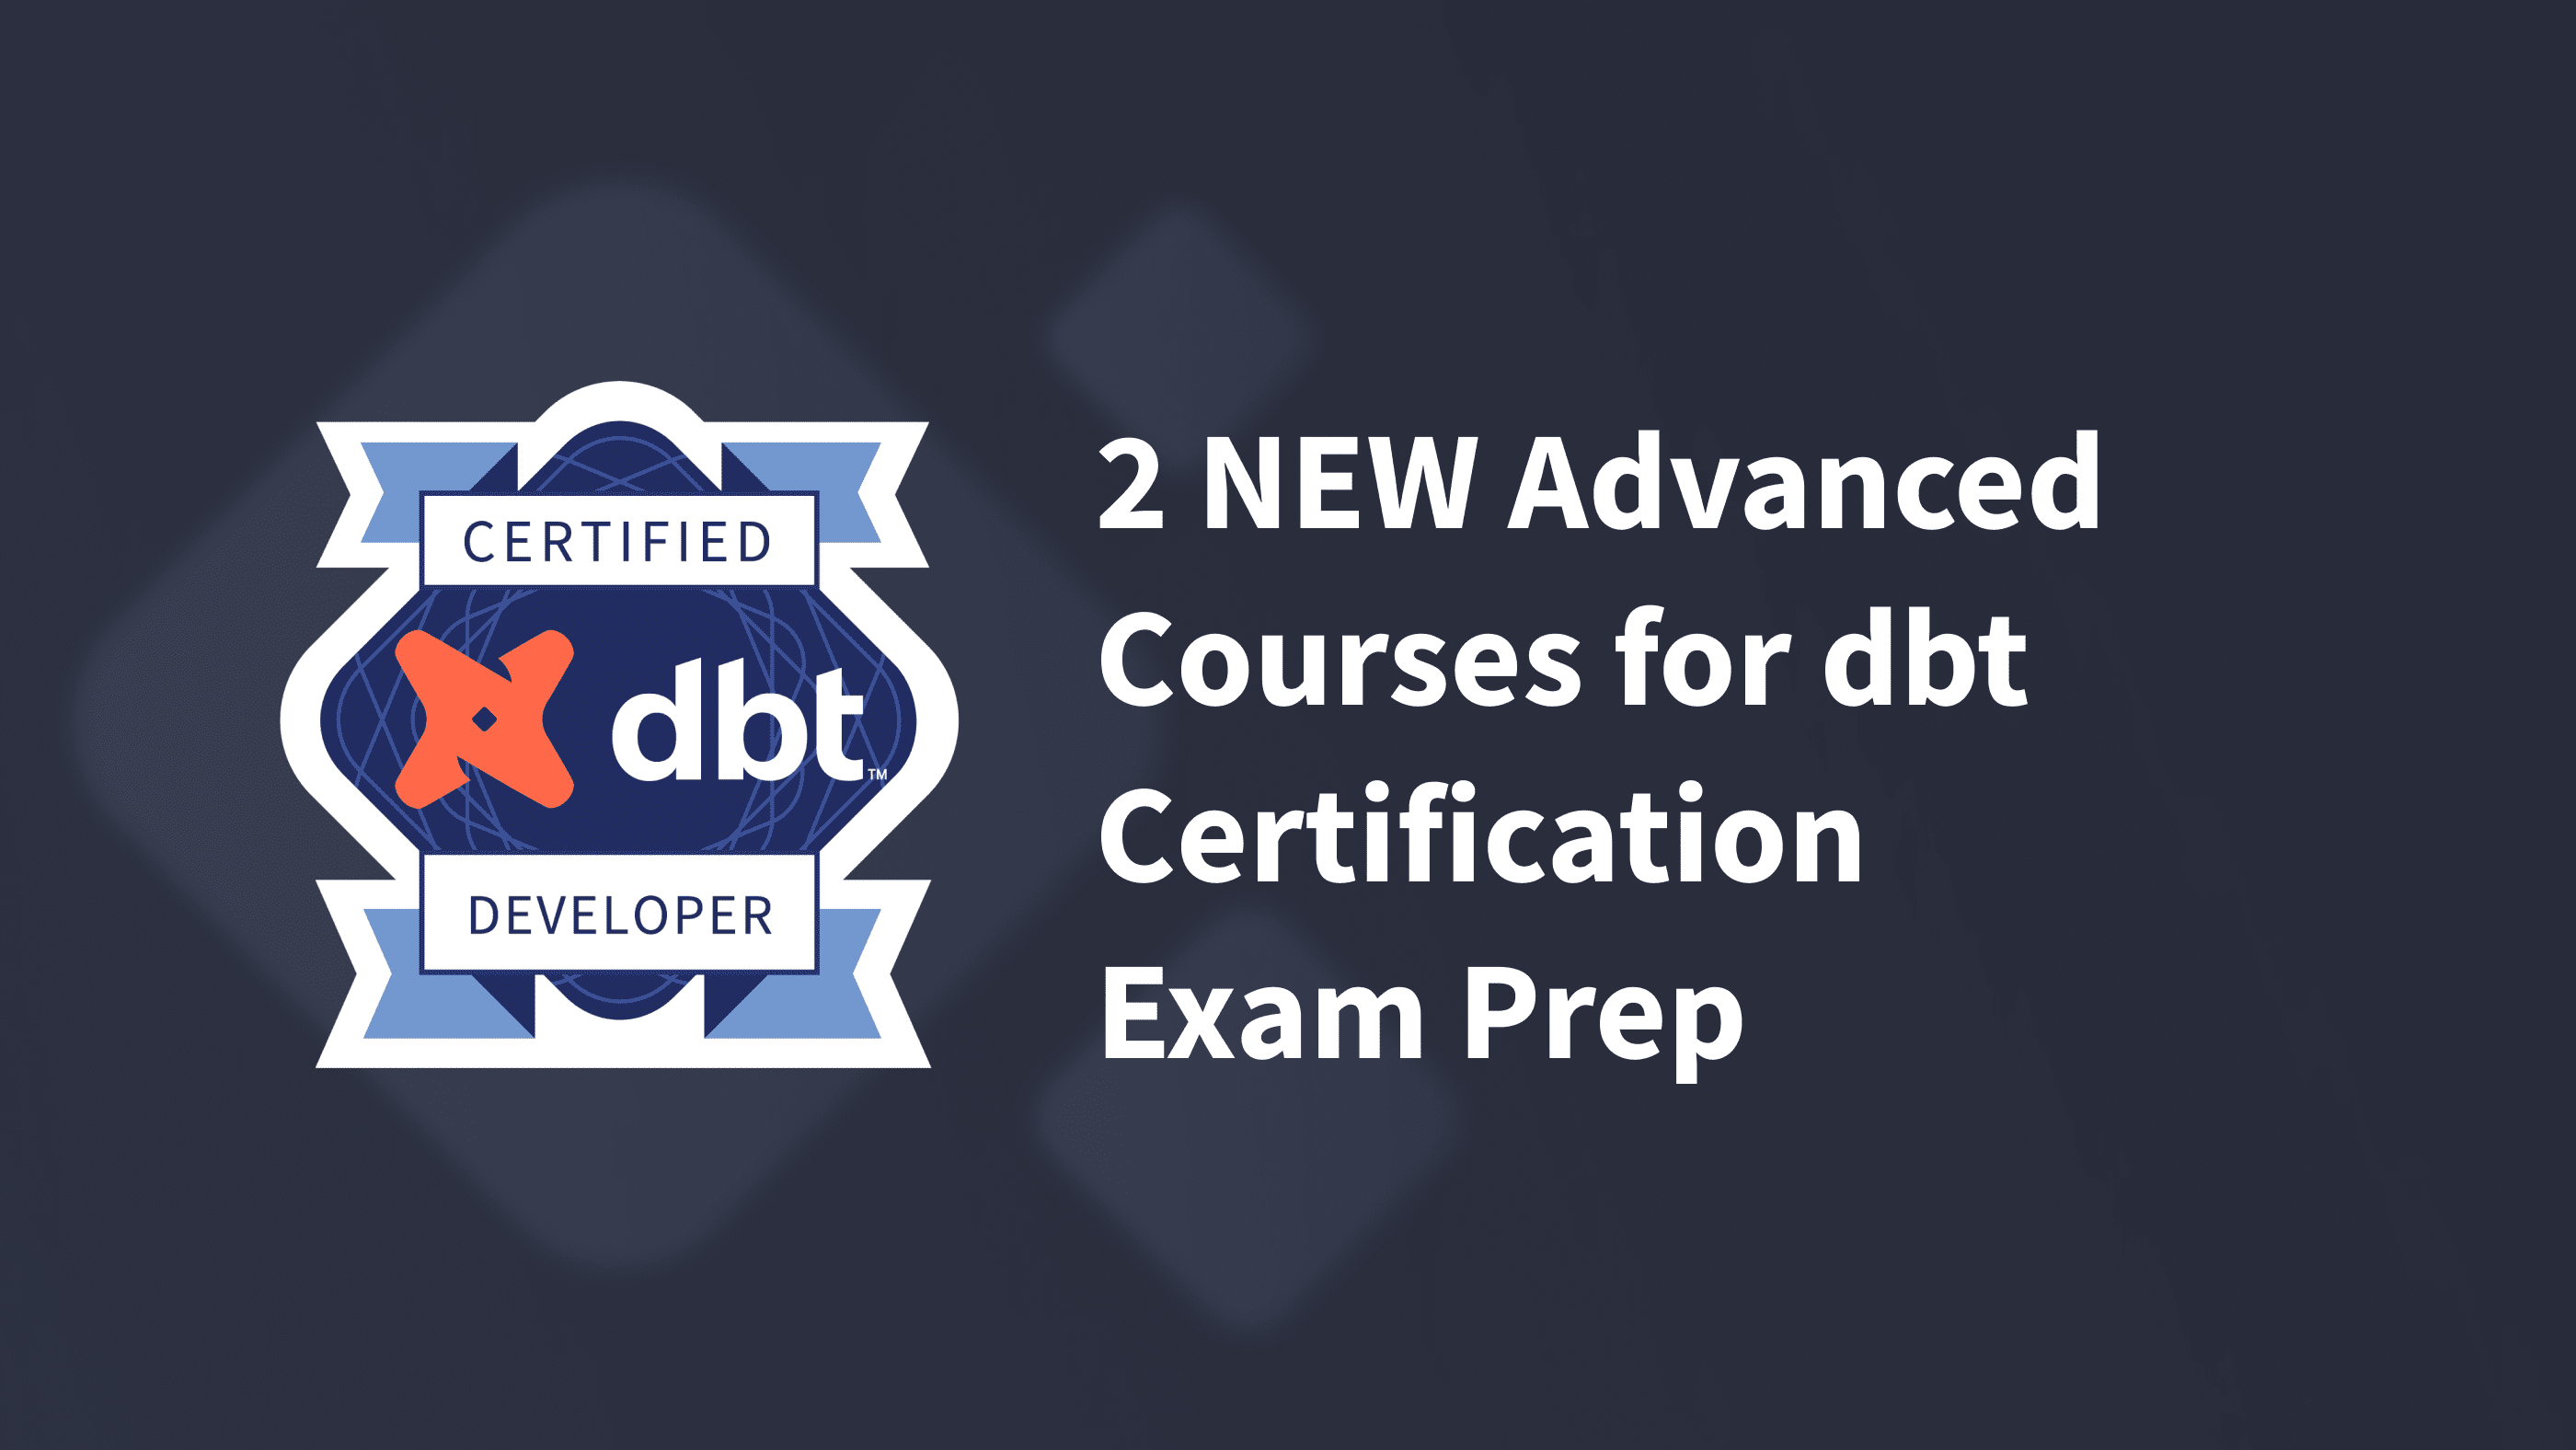 Introducing 2 NEW dbt Learn advanced courses to help you prepare for